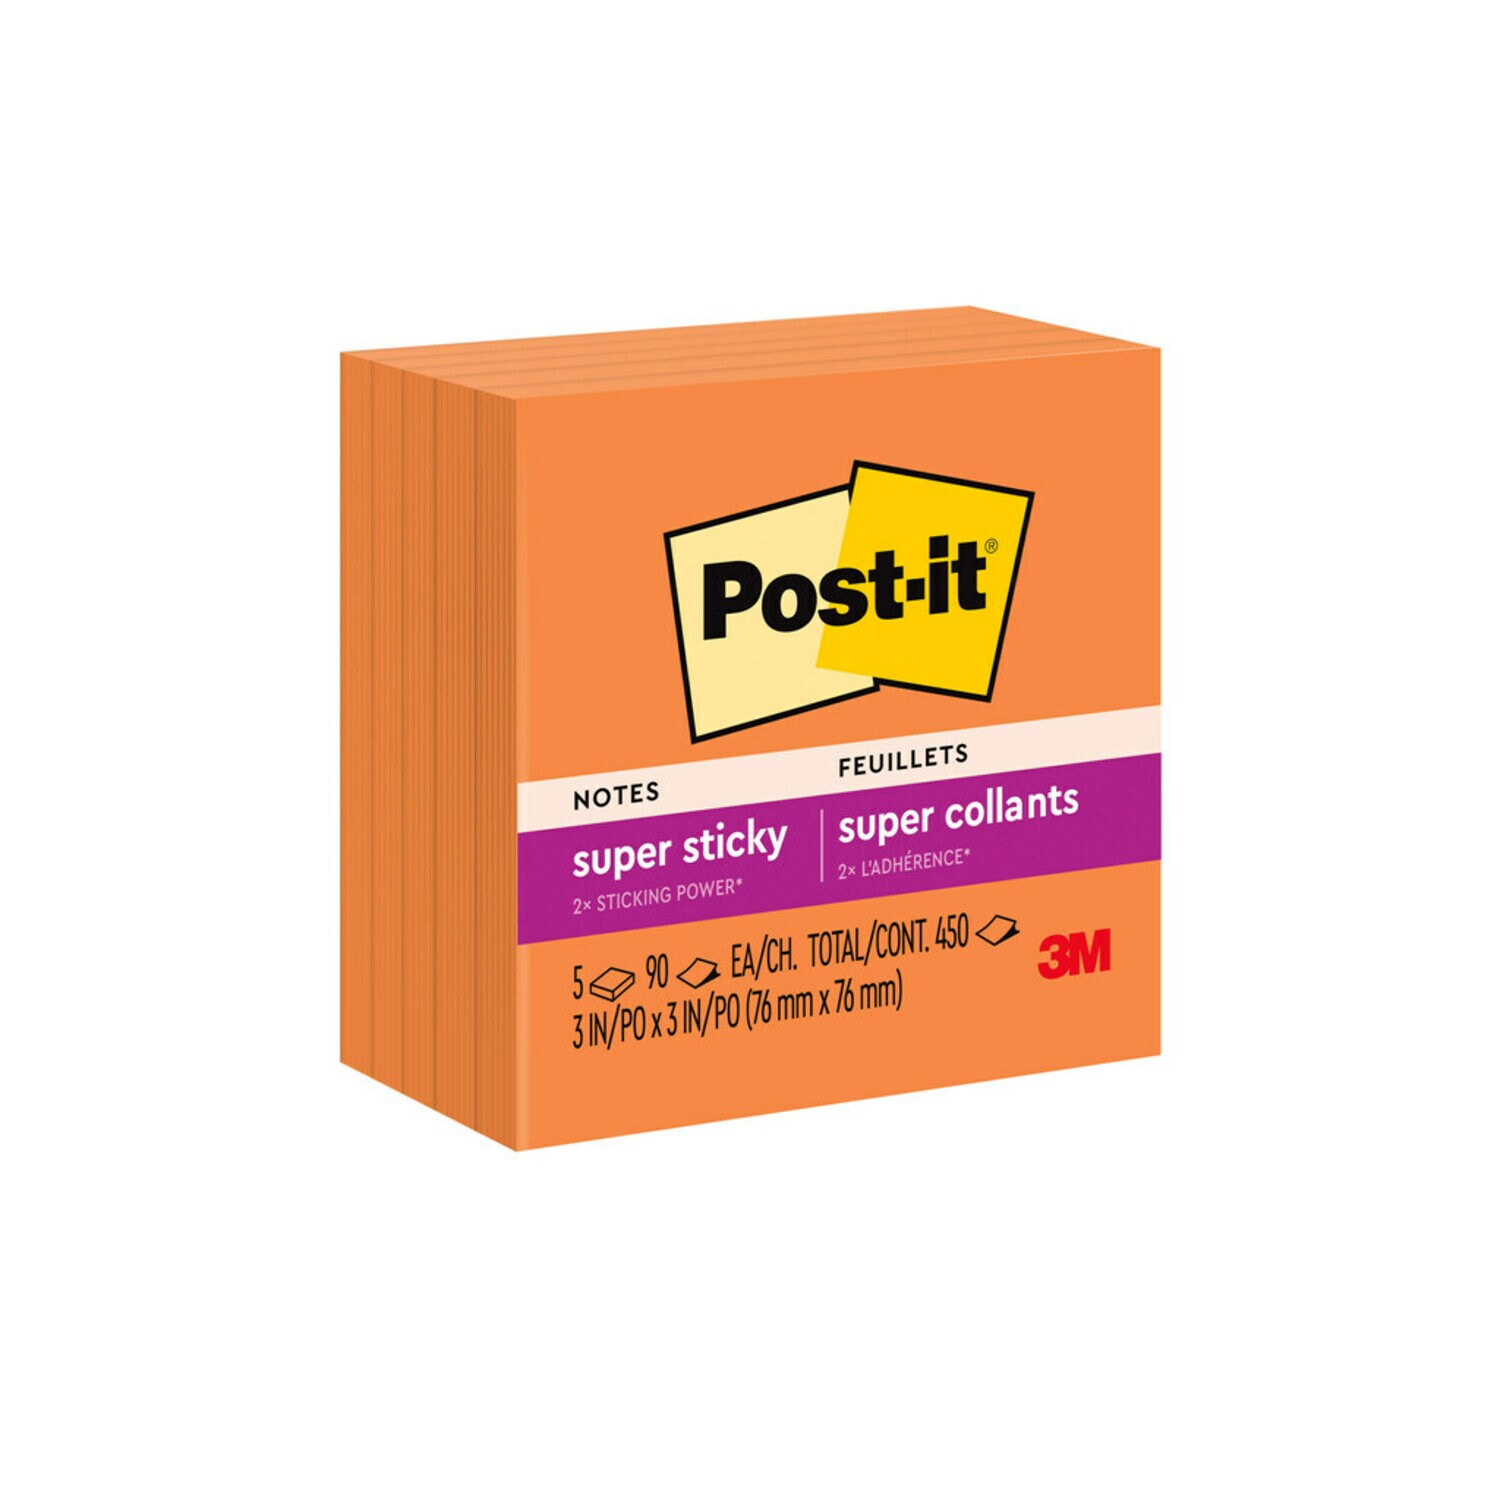 7100230175 - Post-it Super Sticky Notes 654-5SSNO, 3 in x 3 in (76 mm x 76 mm), Neon Orange